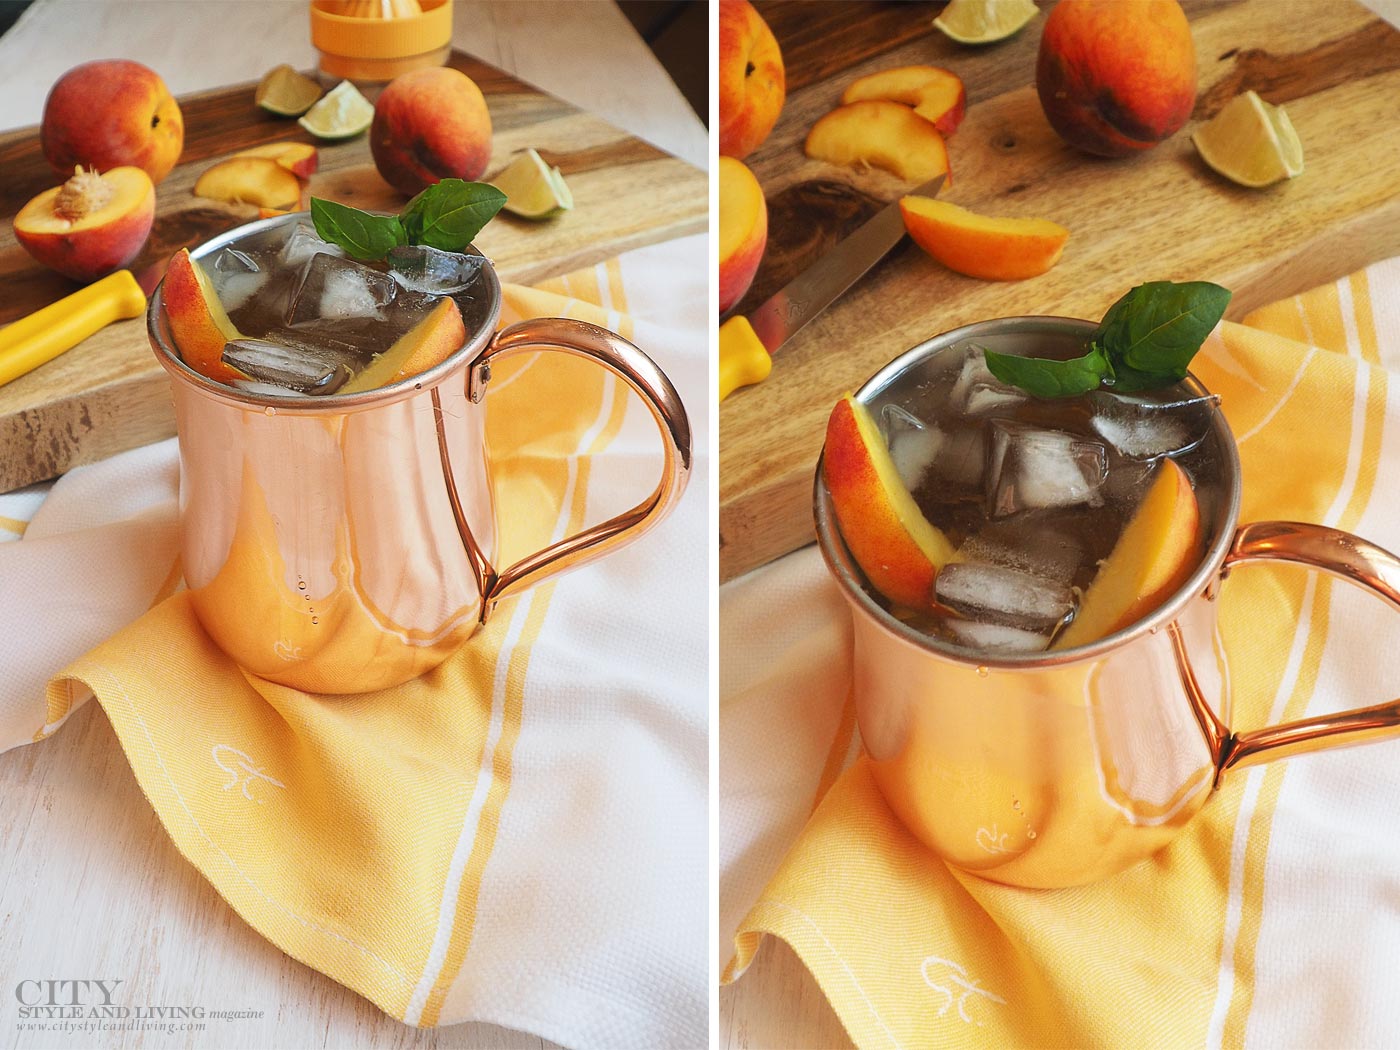 City Style and Living Magazine peach moscow mule final copper mug